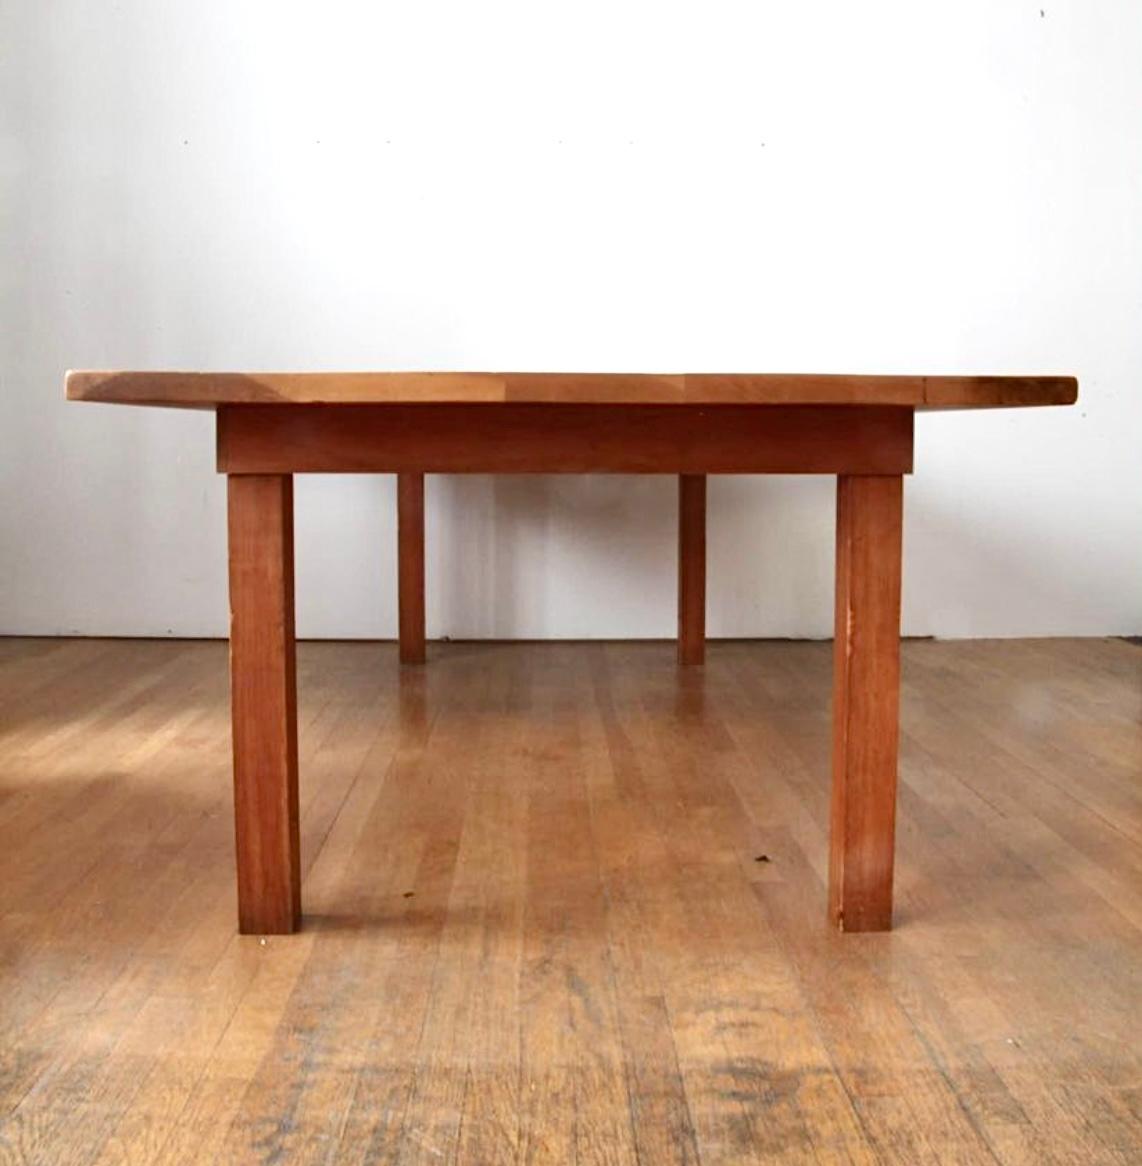 This remarkable table is attributed to James Cooper, a well known carpenter in New York in the 1980s. It is unsigned. 

The table was previously owned by a distinguished museum curator in NYC who was friendly with the master carpenter James Cooper